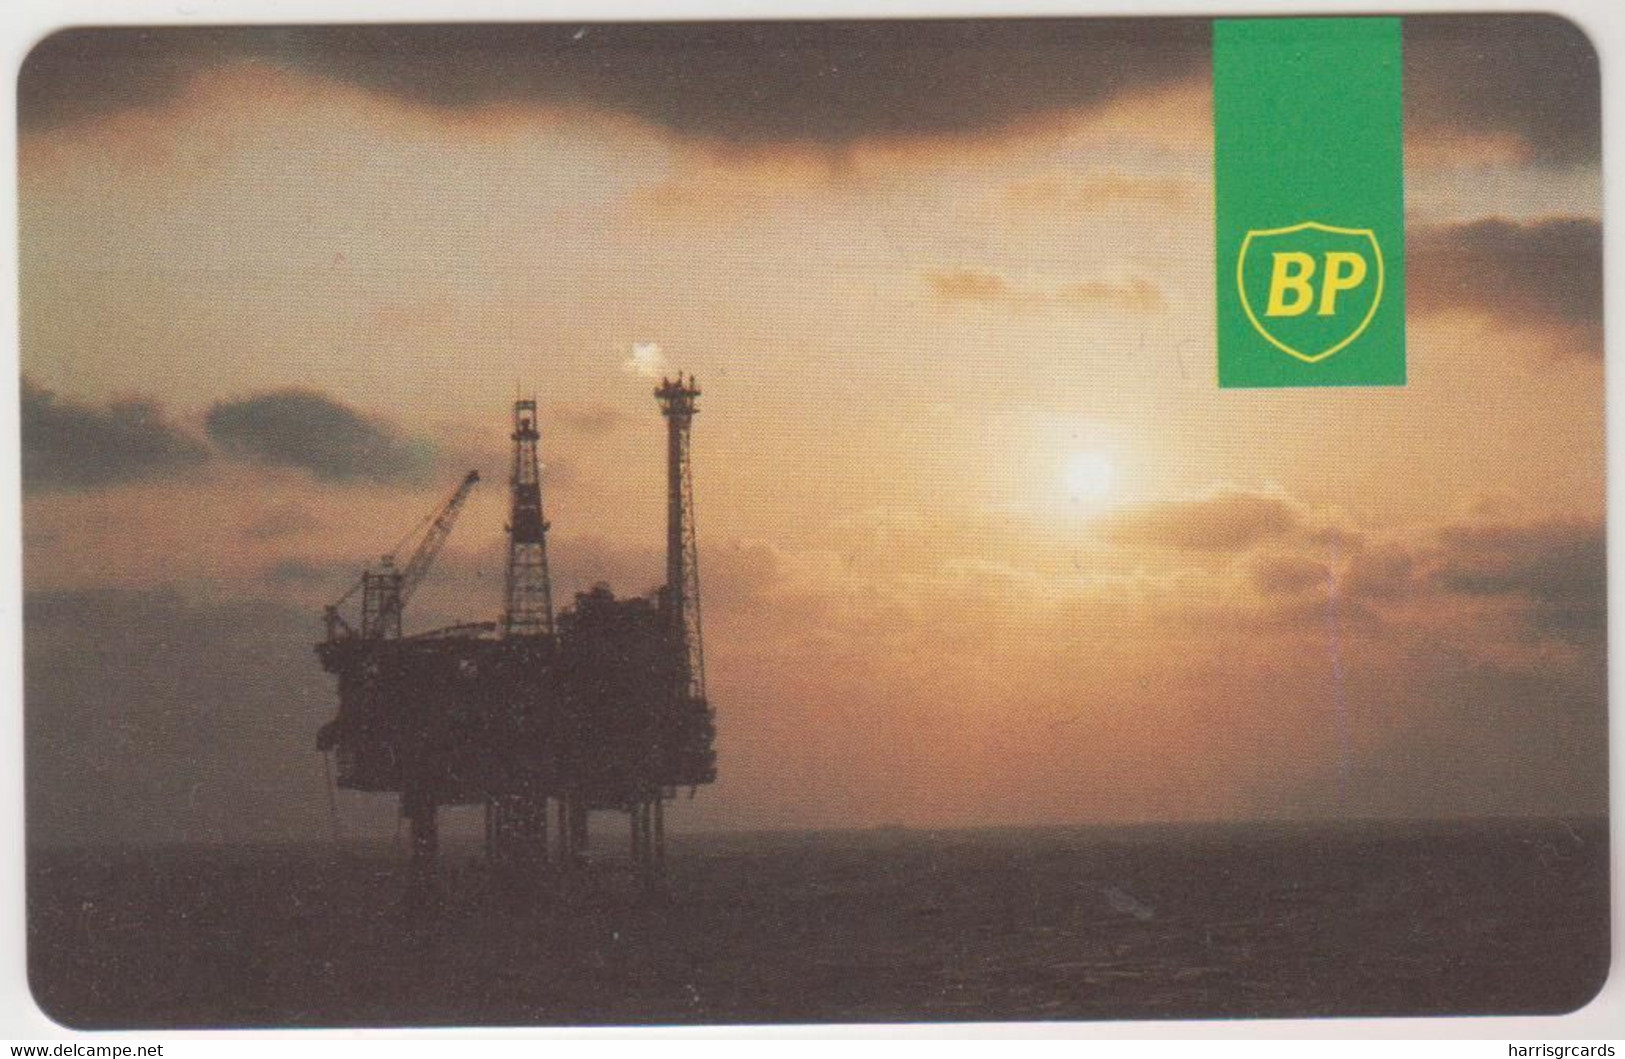 UK (Autelca) - BP, 50 Units, IPL Logo In Red, Red Face Value, Used - [ 2] Oil Drilling Rig